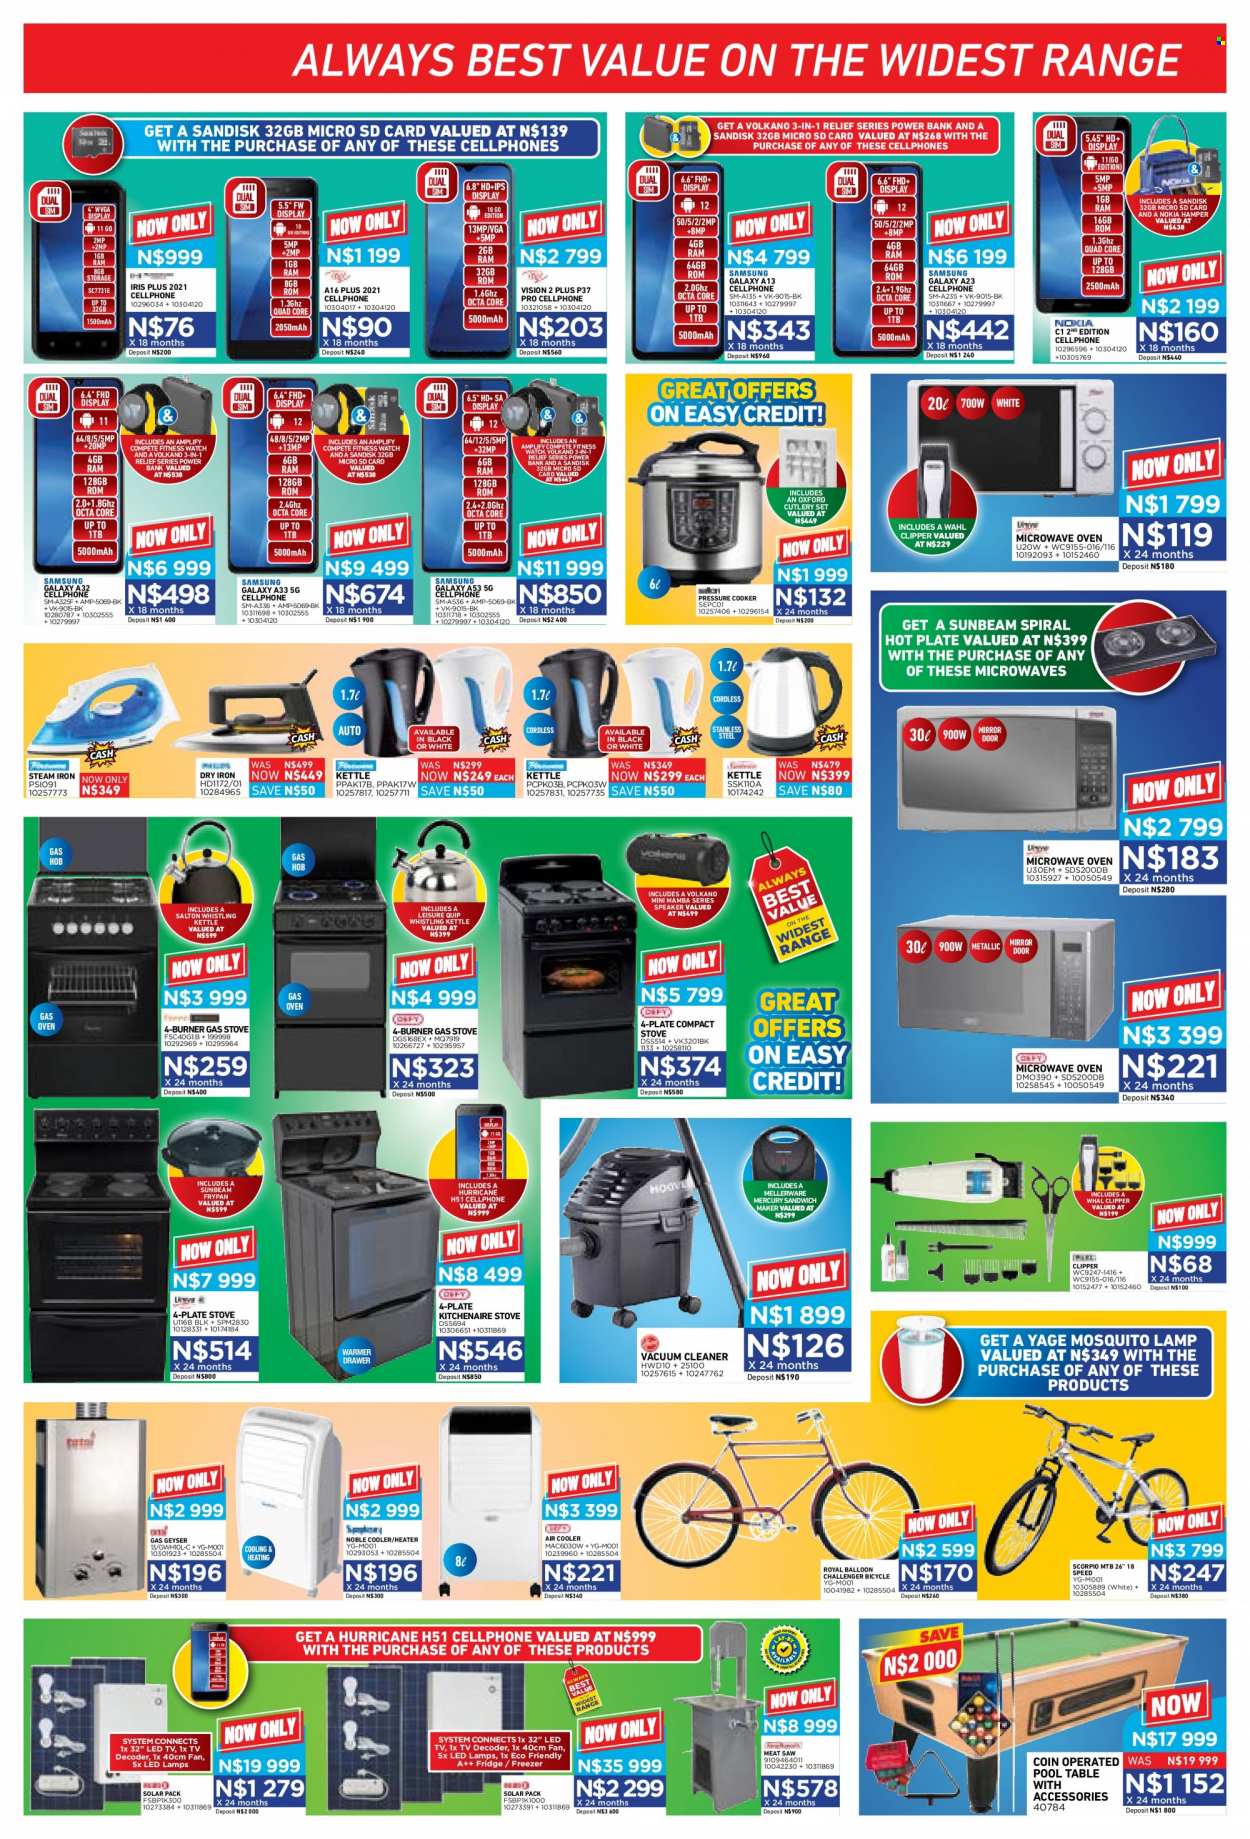 Furnmart catalogue  - 19/09/2022 - 15/10/2022 - Sales products - table, mirror, fitness smart watch, memory card, Sandisk, power bank, LED TV, TV, decoder, speaker, Volkano, freezer, refrigerator, fridge, oven, gas stove, microwave oven, hob, Sunbeam, vacuum cleaner, pressure cooker, sandwich maker, kettle, iron, steam iron, bike. Page 7.